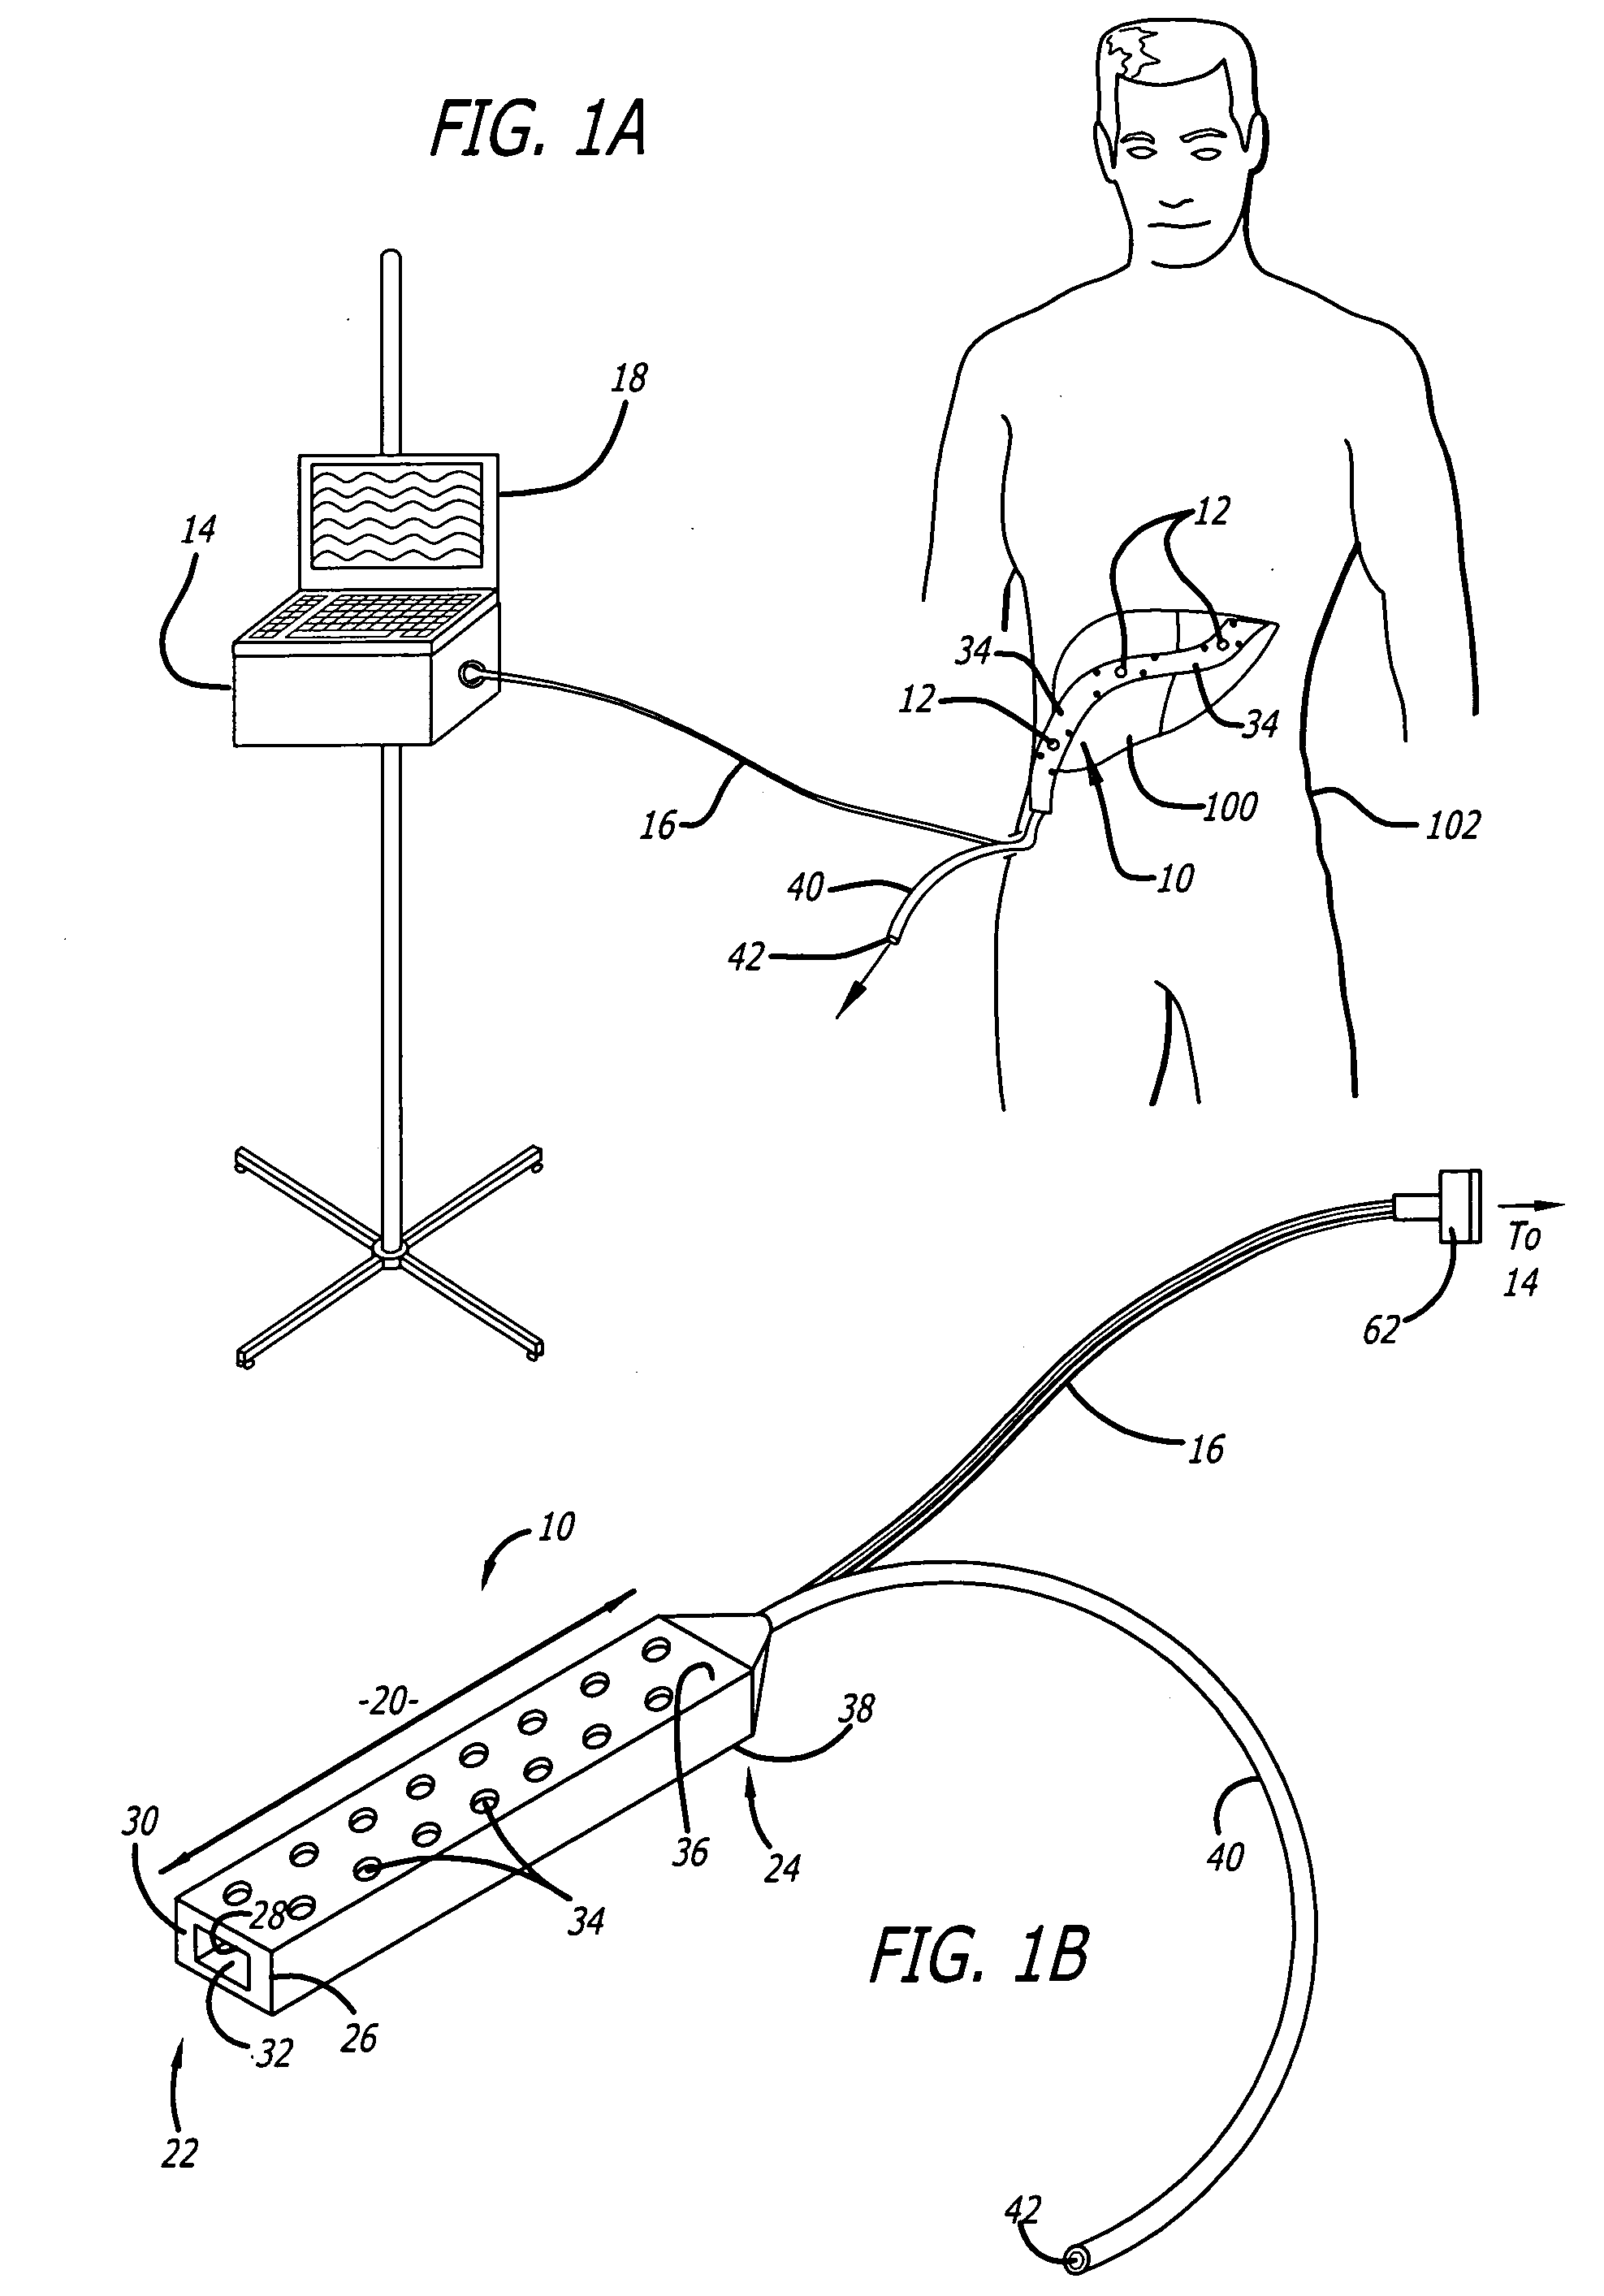 Surgical drain with sensors for monitoring internal tissue condition by transmittance